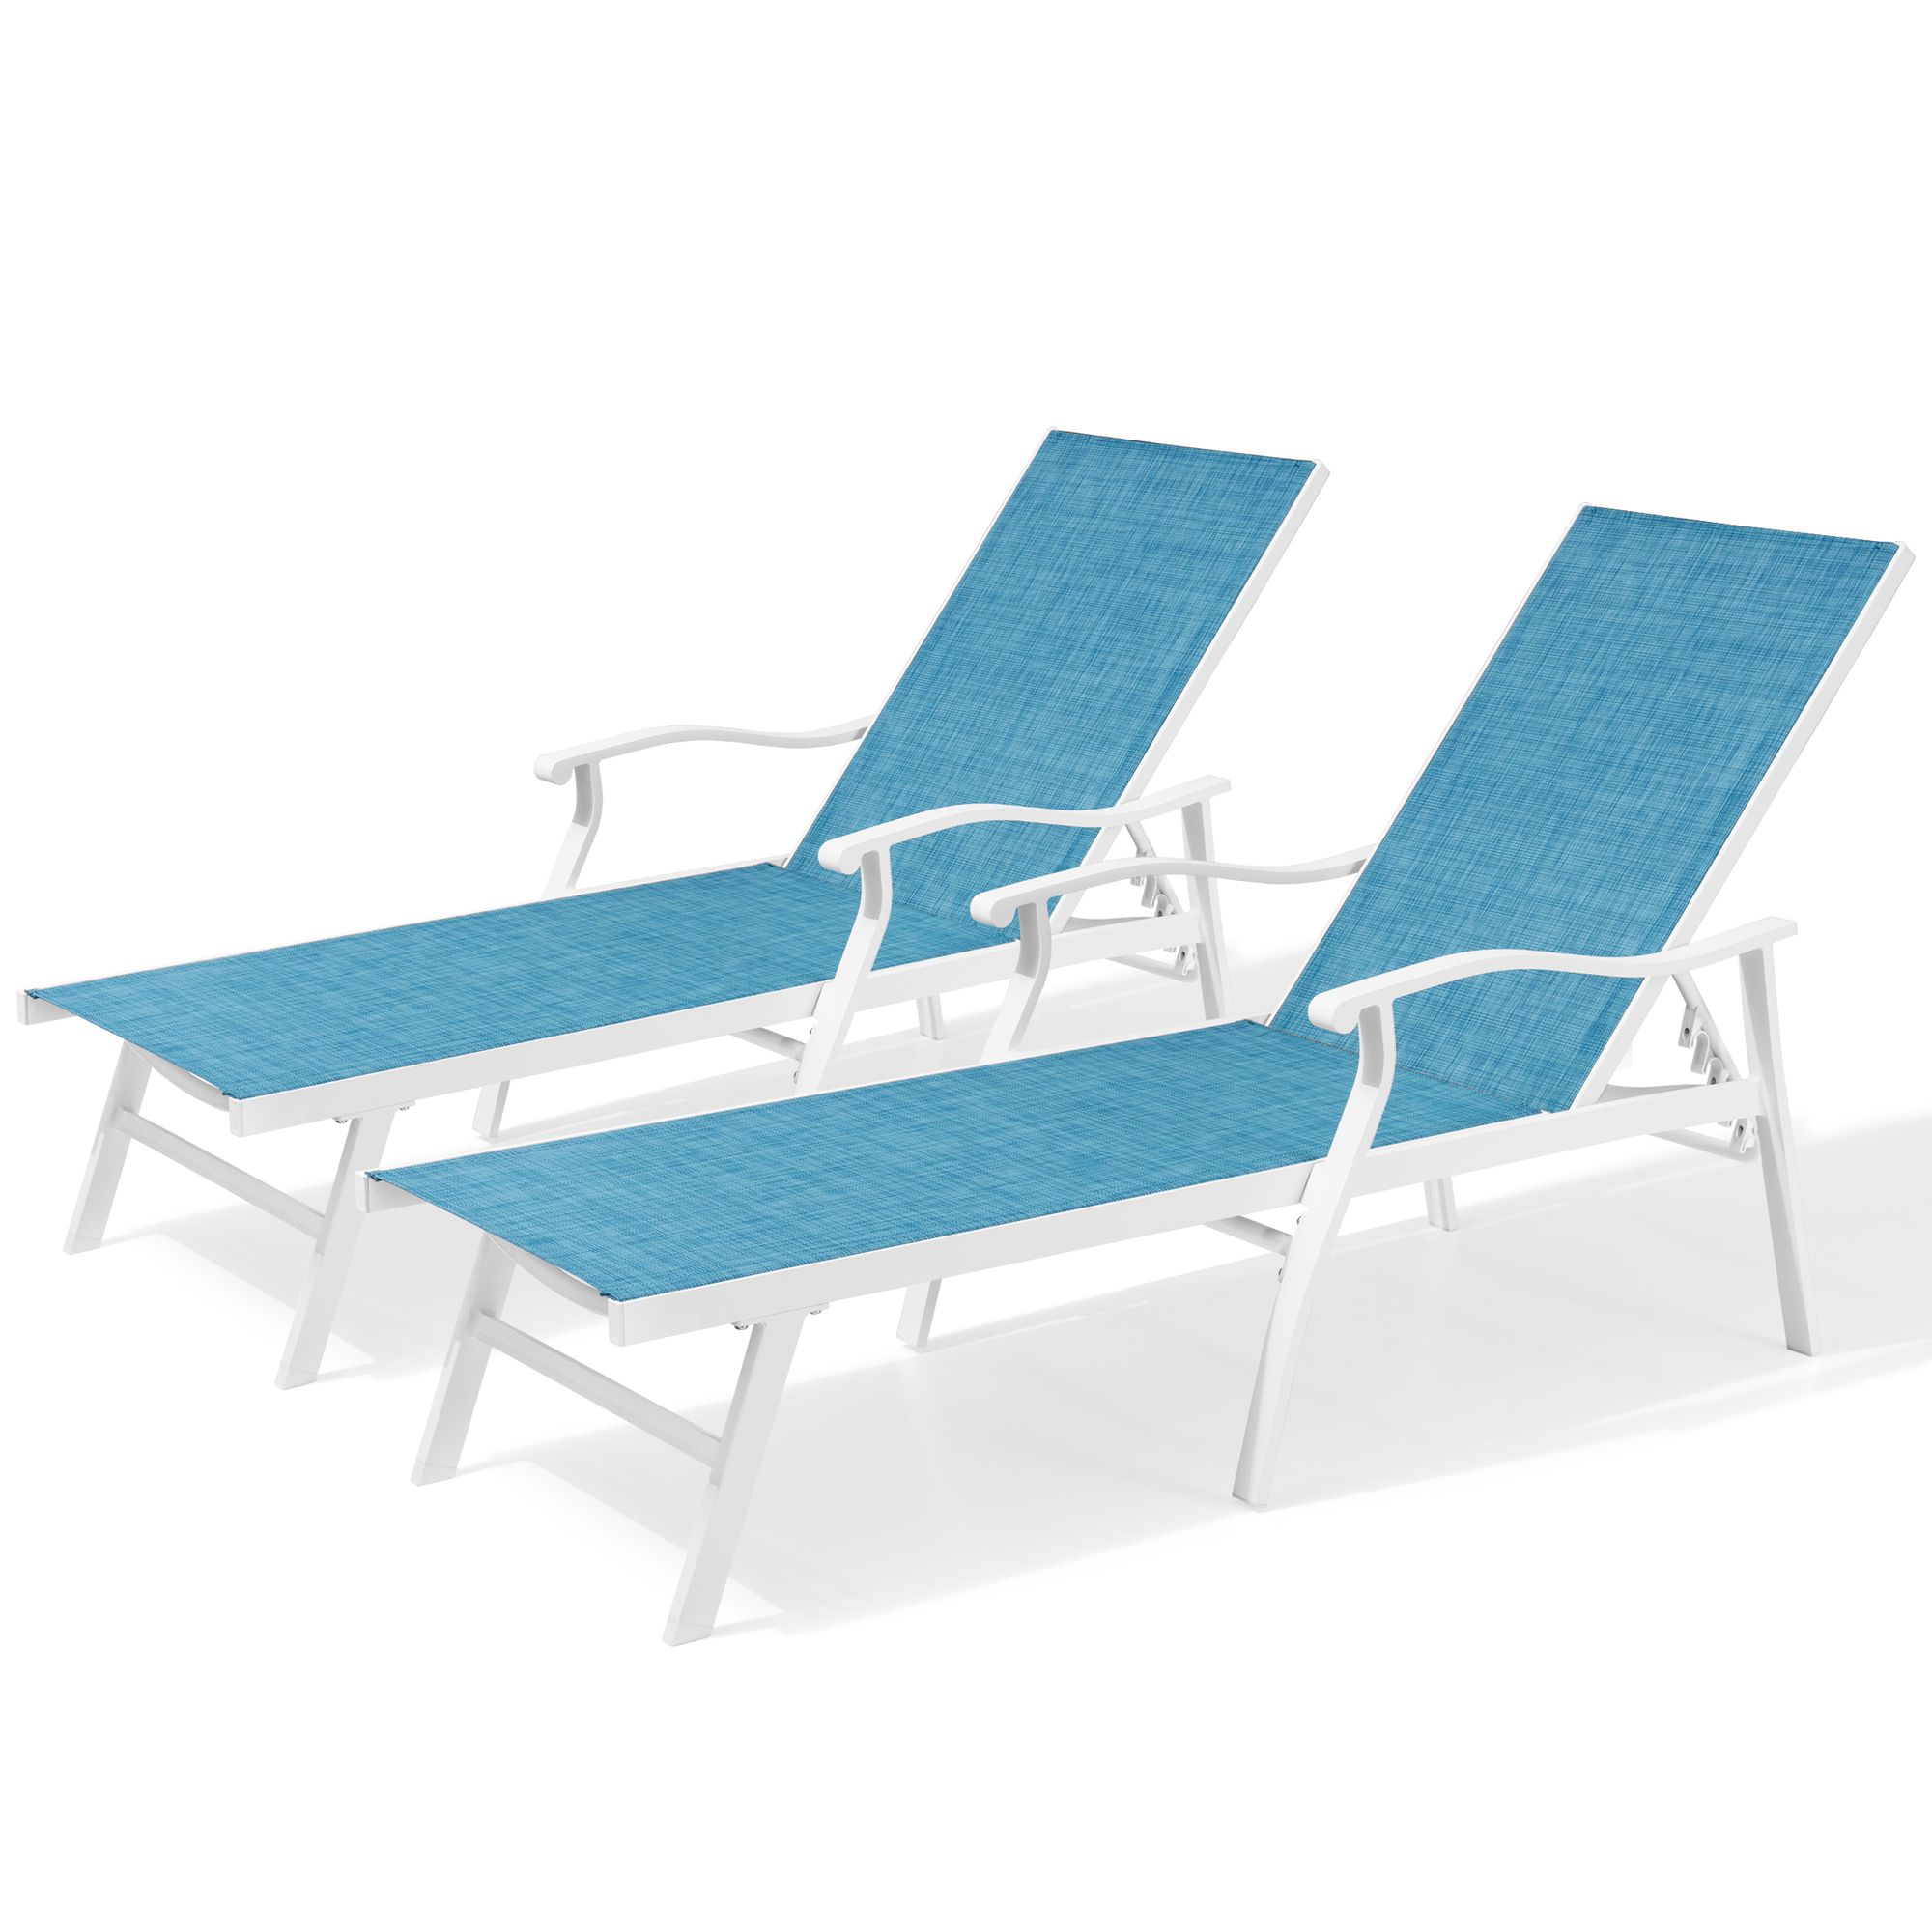 Pellebant Set of 2 Outdoor Chaise Lounge Aluminum Adjustable Patio Recliner Chairs Blue - image 1 of 9